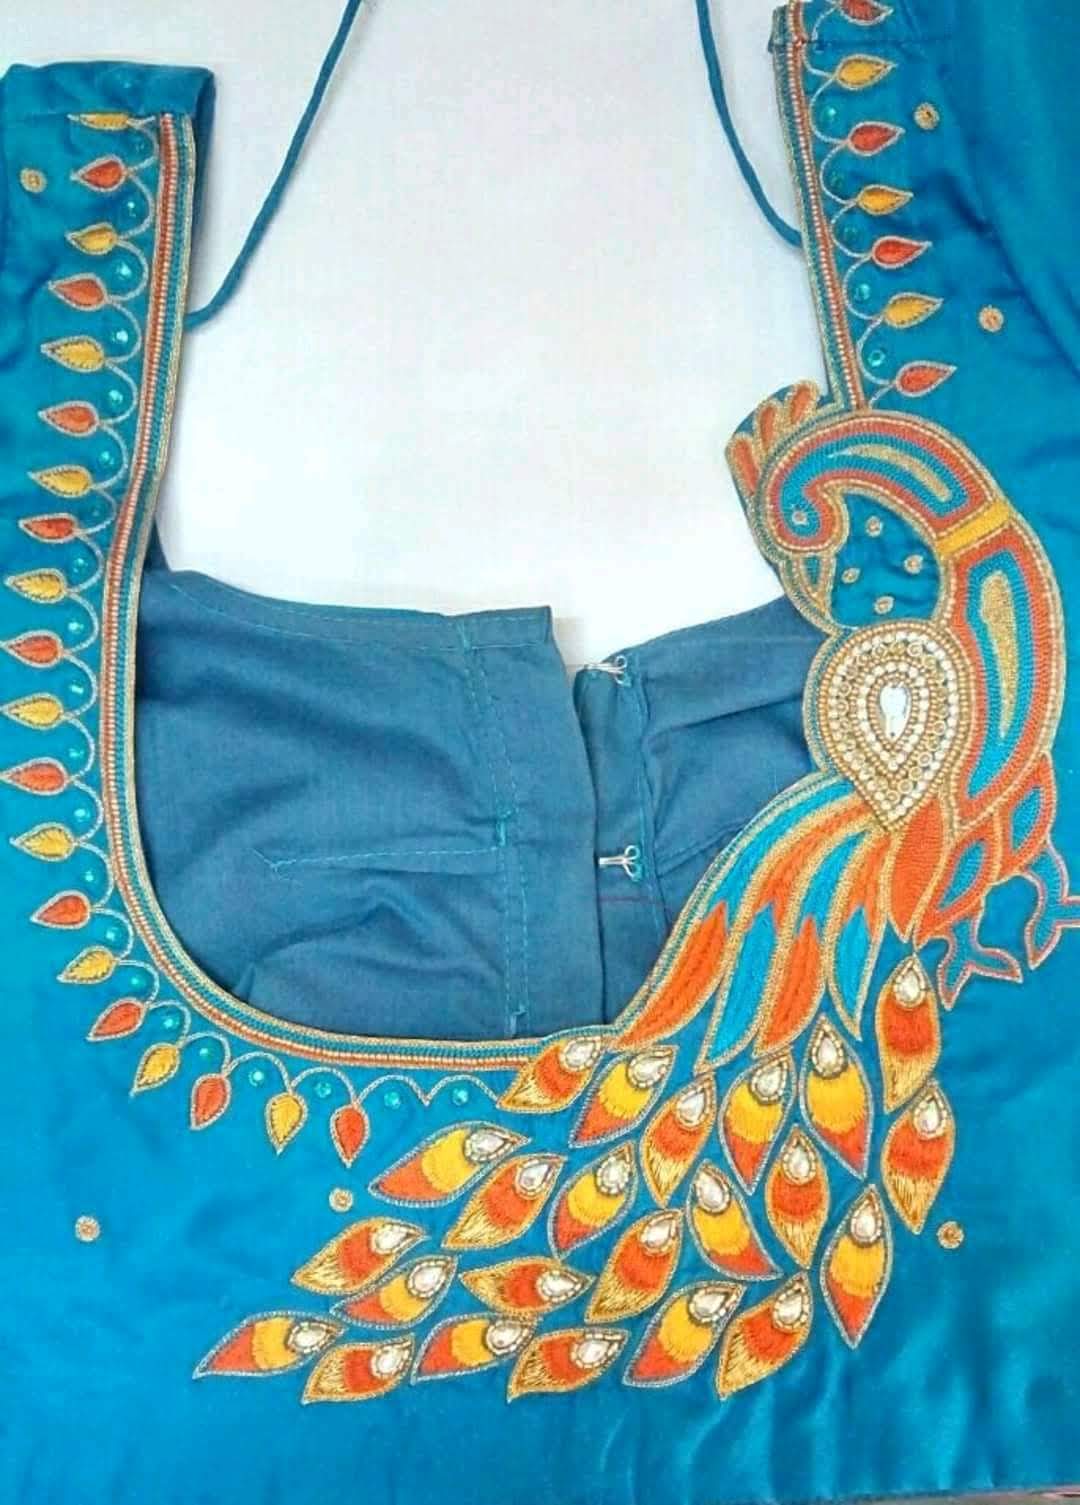 Simple Peacock Aari Work Blouse Designs : Check out our design blouse ...